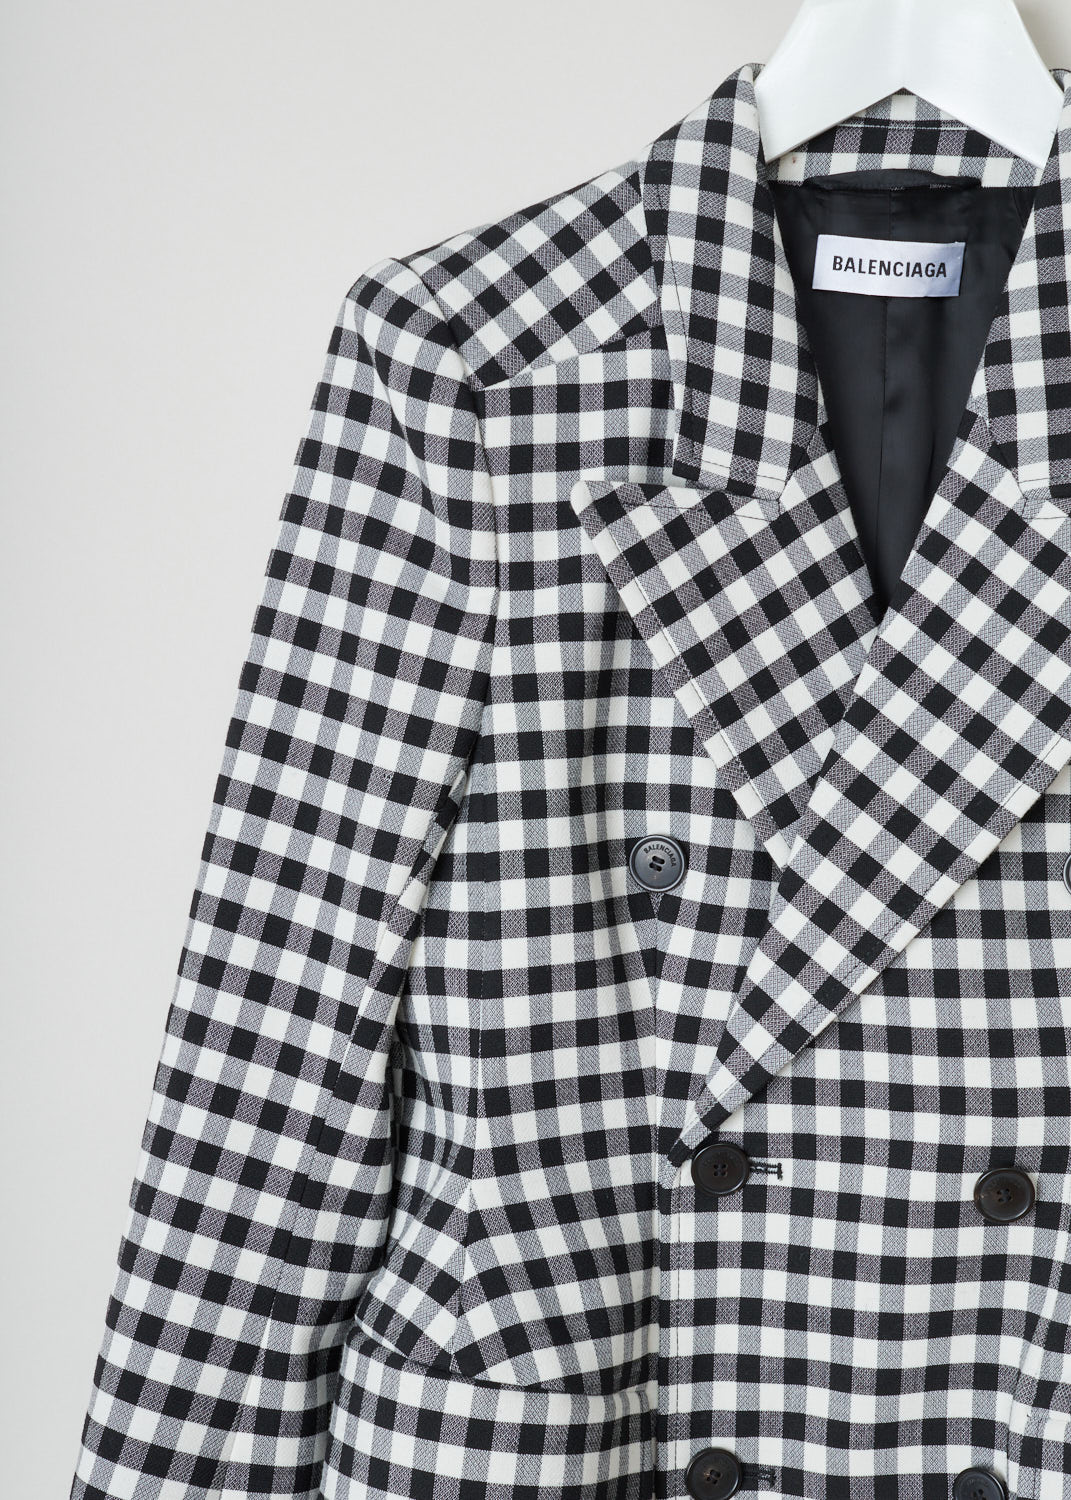 Balenciaga, Checkered double breasted blazer, 479866_TDT10_1070, black white, detail. Black and white checkered jacket, double breasted model with regular collar and peak lapels. Accent on the waist due to padded hip parts. Long cuffed sleeves with four buttons. Comes with two flap pockets on the front.